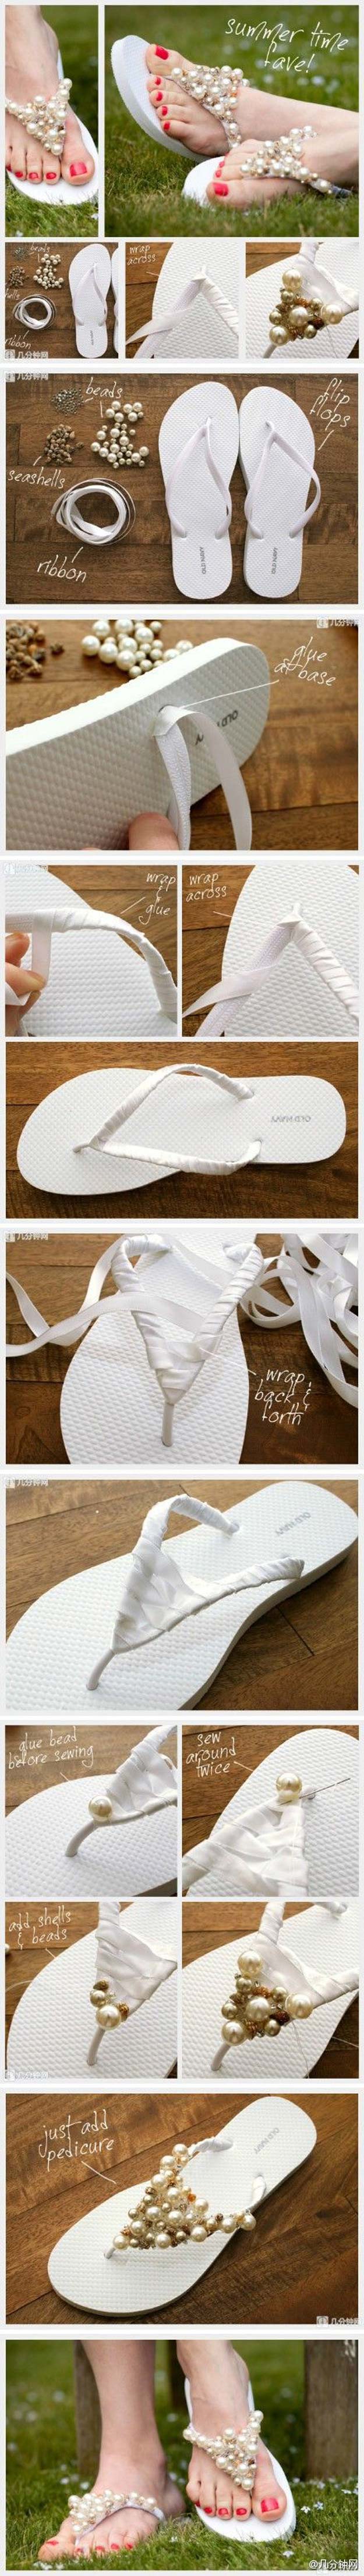 DIY Sandals and Flip Flops - Flip Flop Easy Embellish - Creative, Cool and Easy Ways to Make or Update Your Shoes - Decorate Flip Flops with Cheap Dollar Store Crafts and Ideas - Beaded, Leather, Strappy and Painted Sandal Projects - Fun DIY Projects and Crafts for Teens and Teenagers 